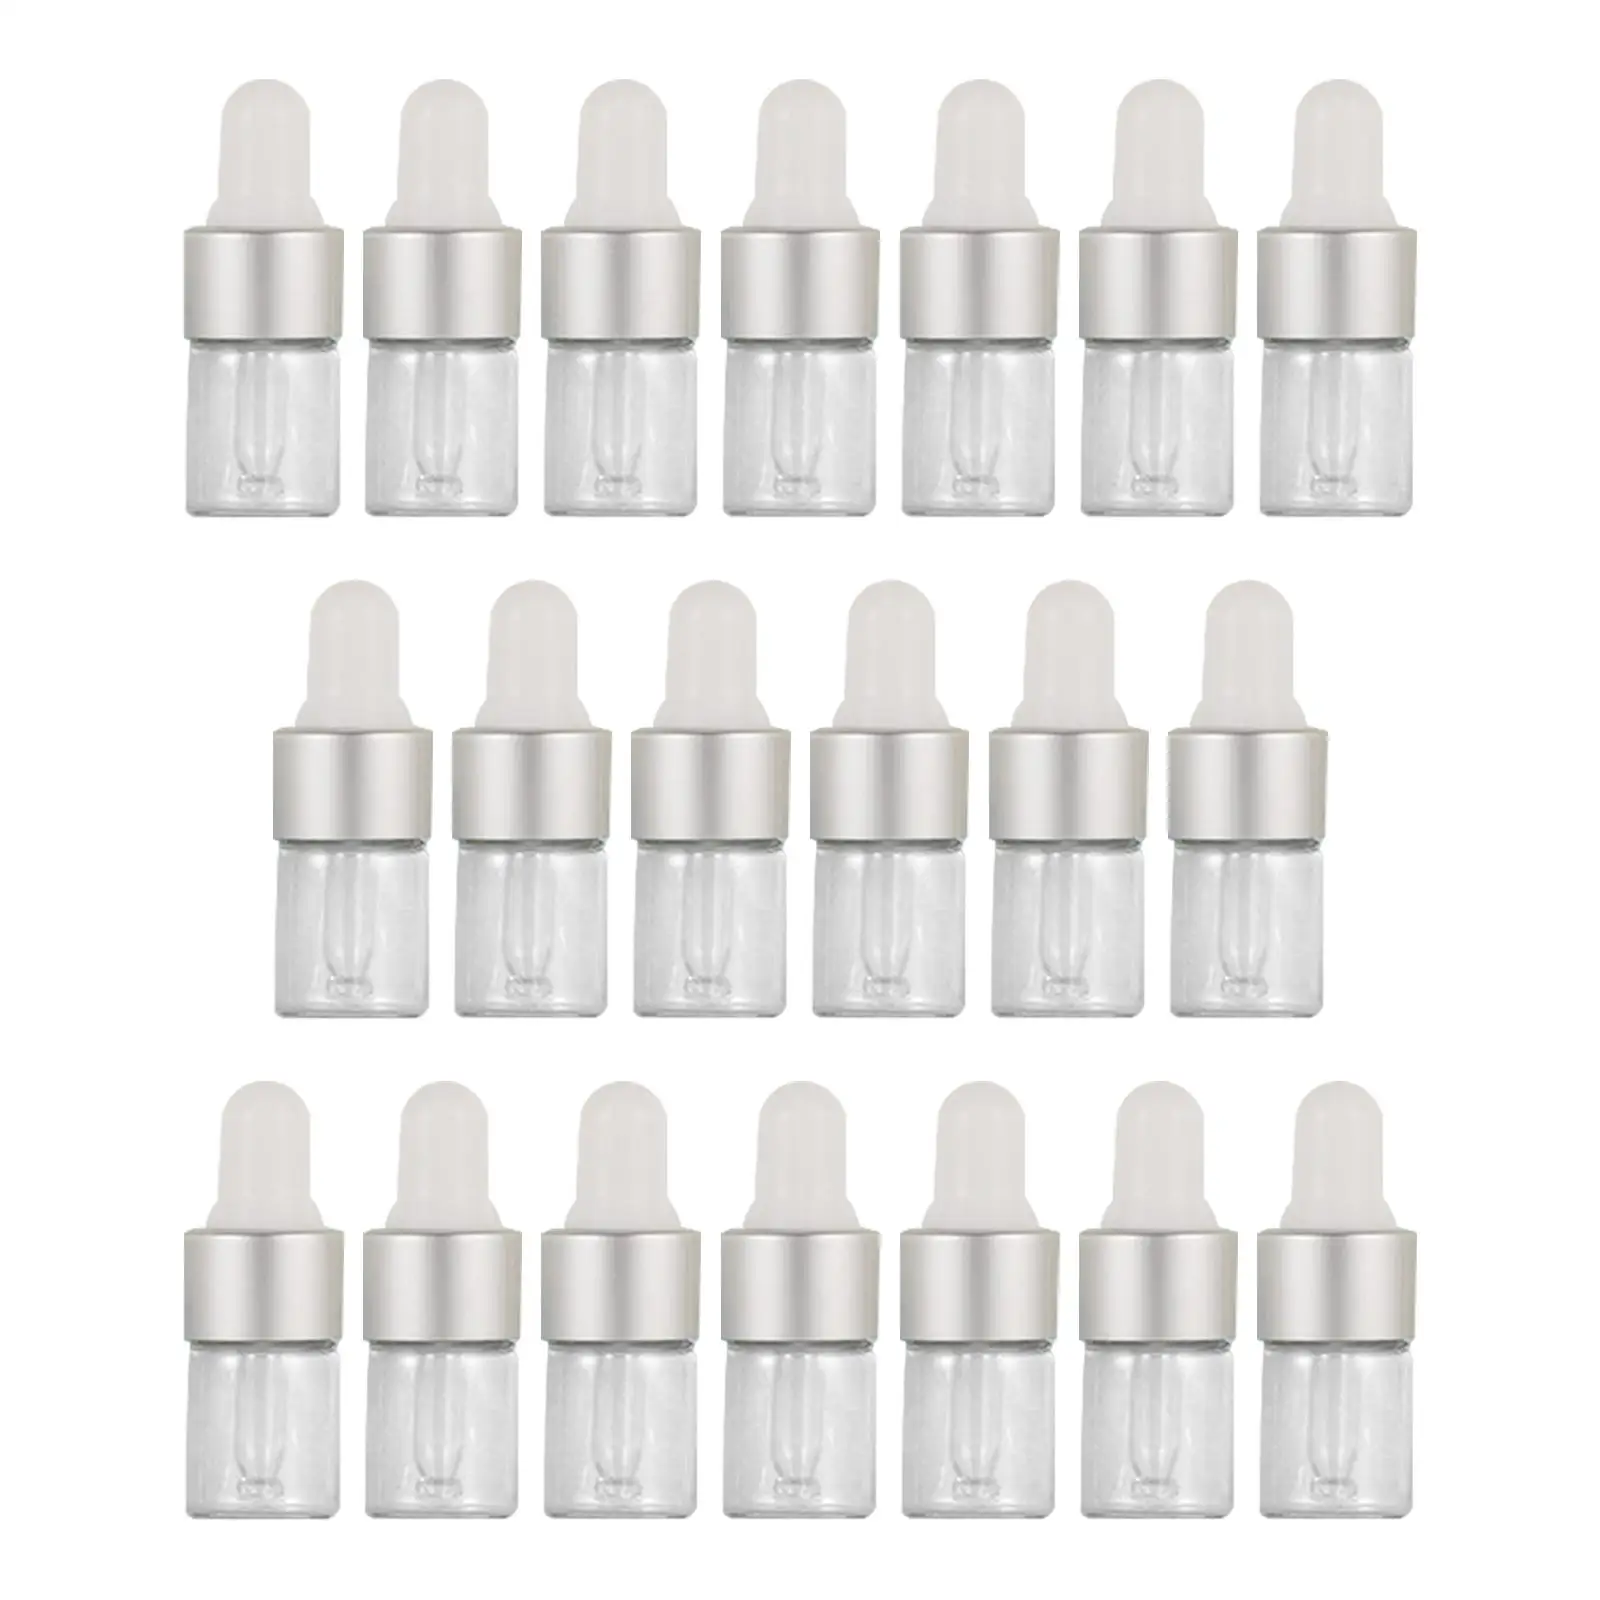 20x glass Dropper Bottles with Eye Droppers Empty Dispenser Containers for Liquids Hair Oil Perfume Oils Body Oils